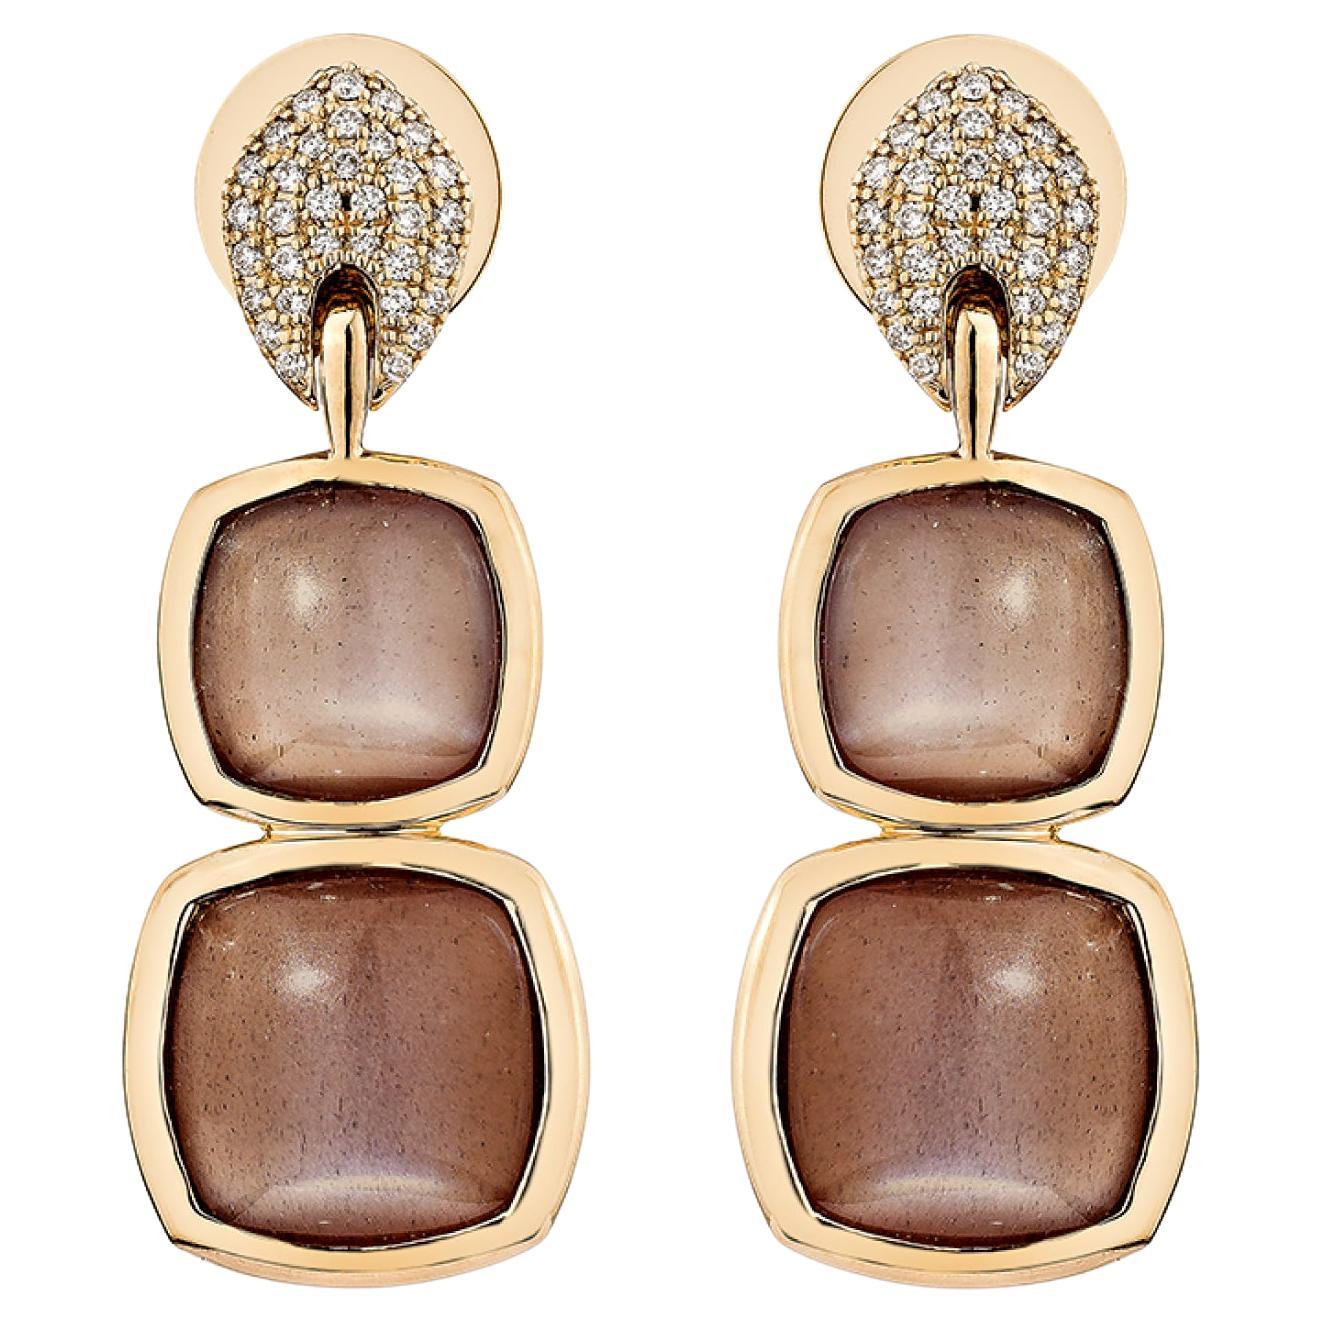 20.086 Carat Chocolate Moonstone Drop Earring in 18KRG With White Diamond.